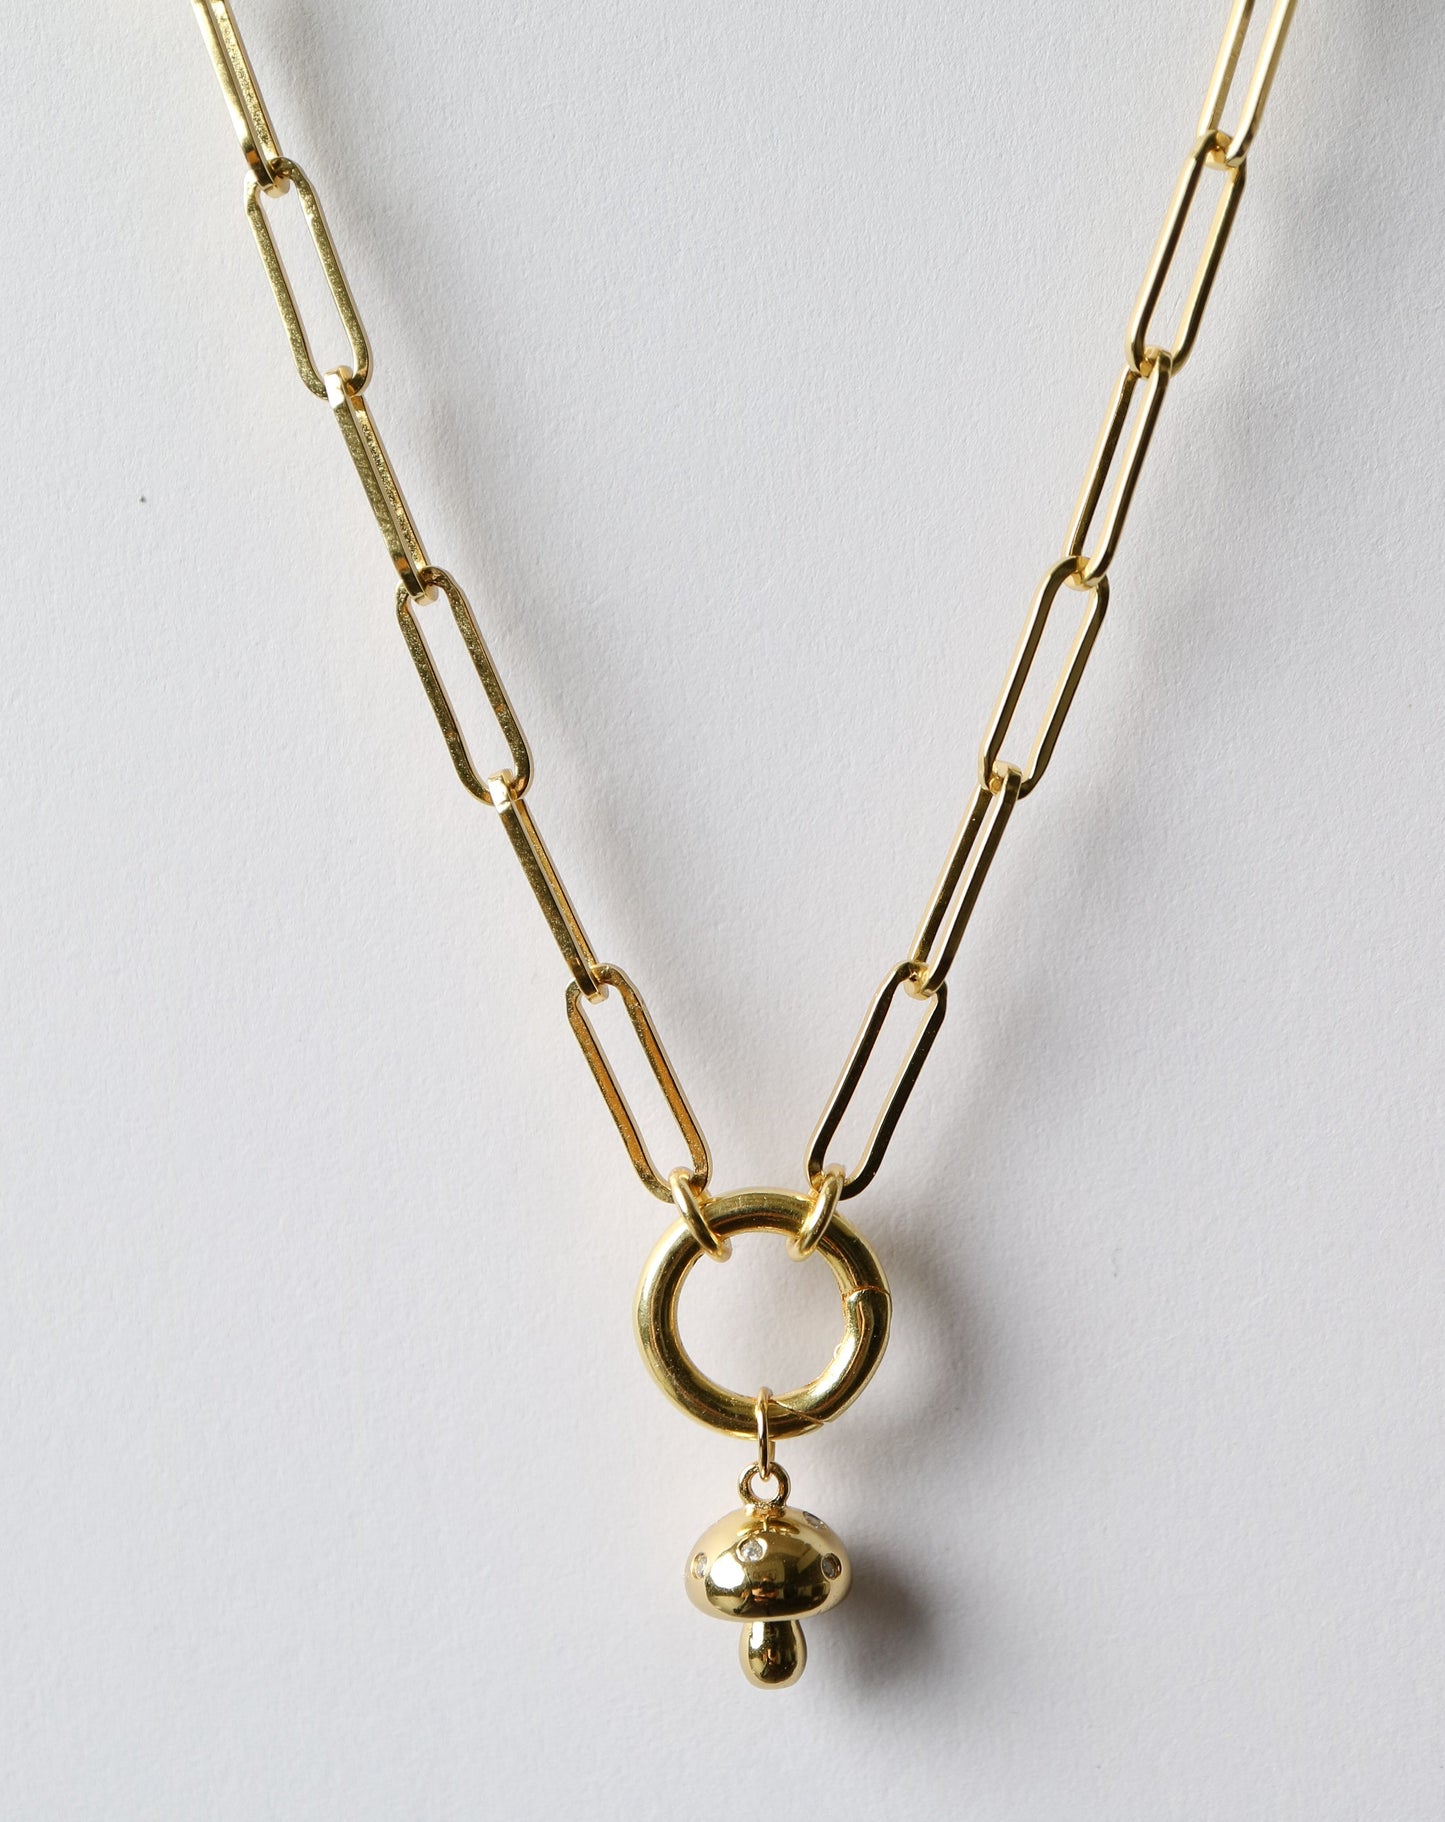 Gold Paperclip Necklace with mushroom charm